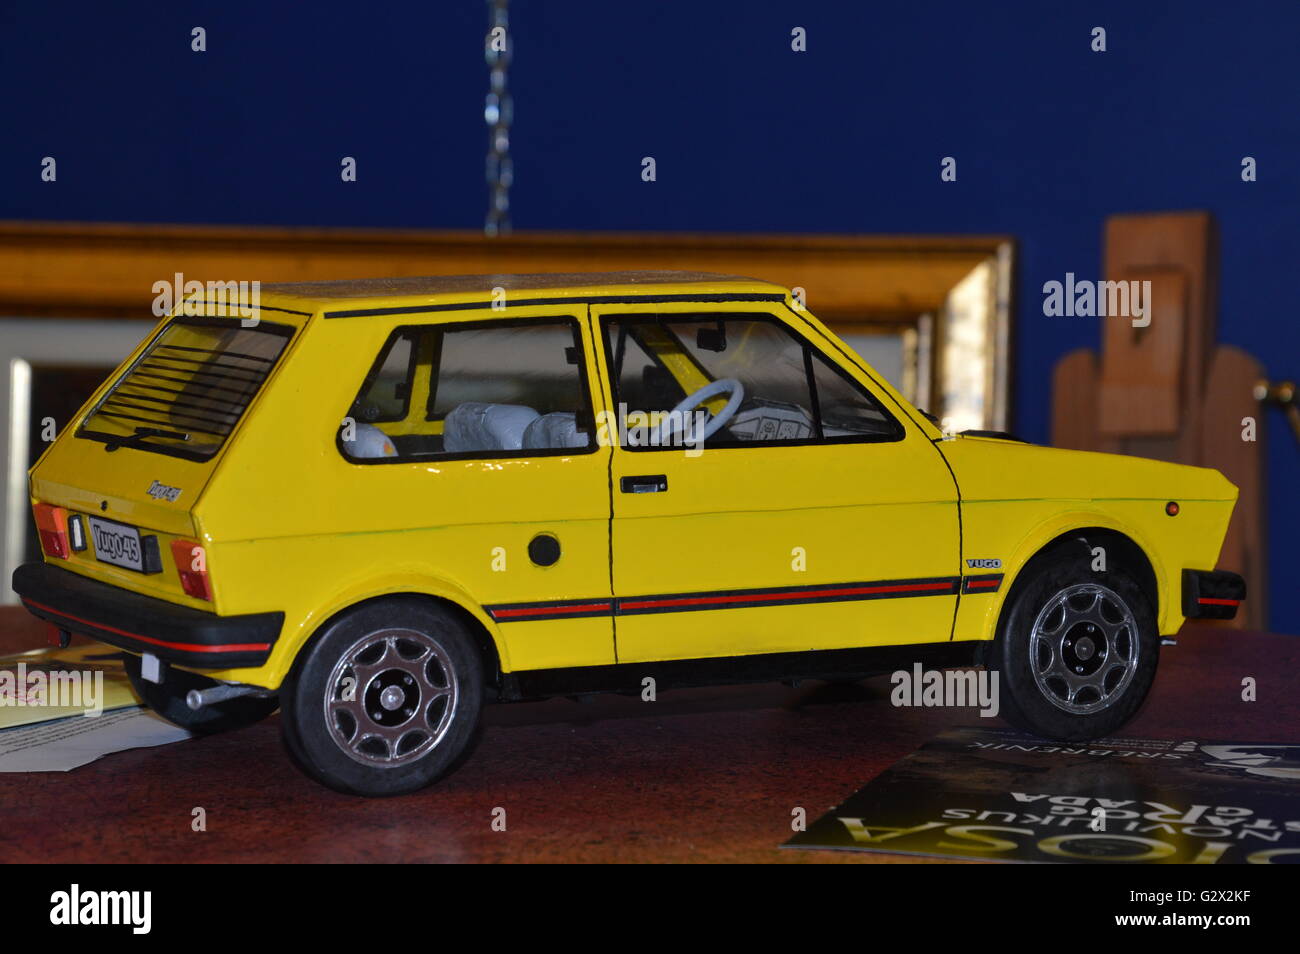 This is model of a car Yugo 45 to people is reminiscent of past times.this car Yugo 45 built in the former Yugoslavia Stock Photo